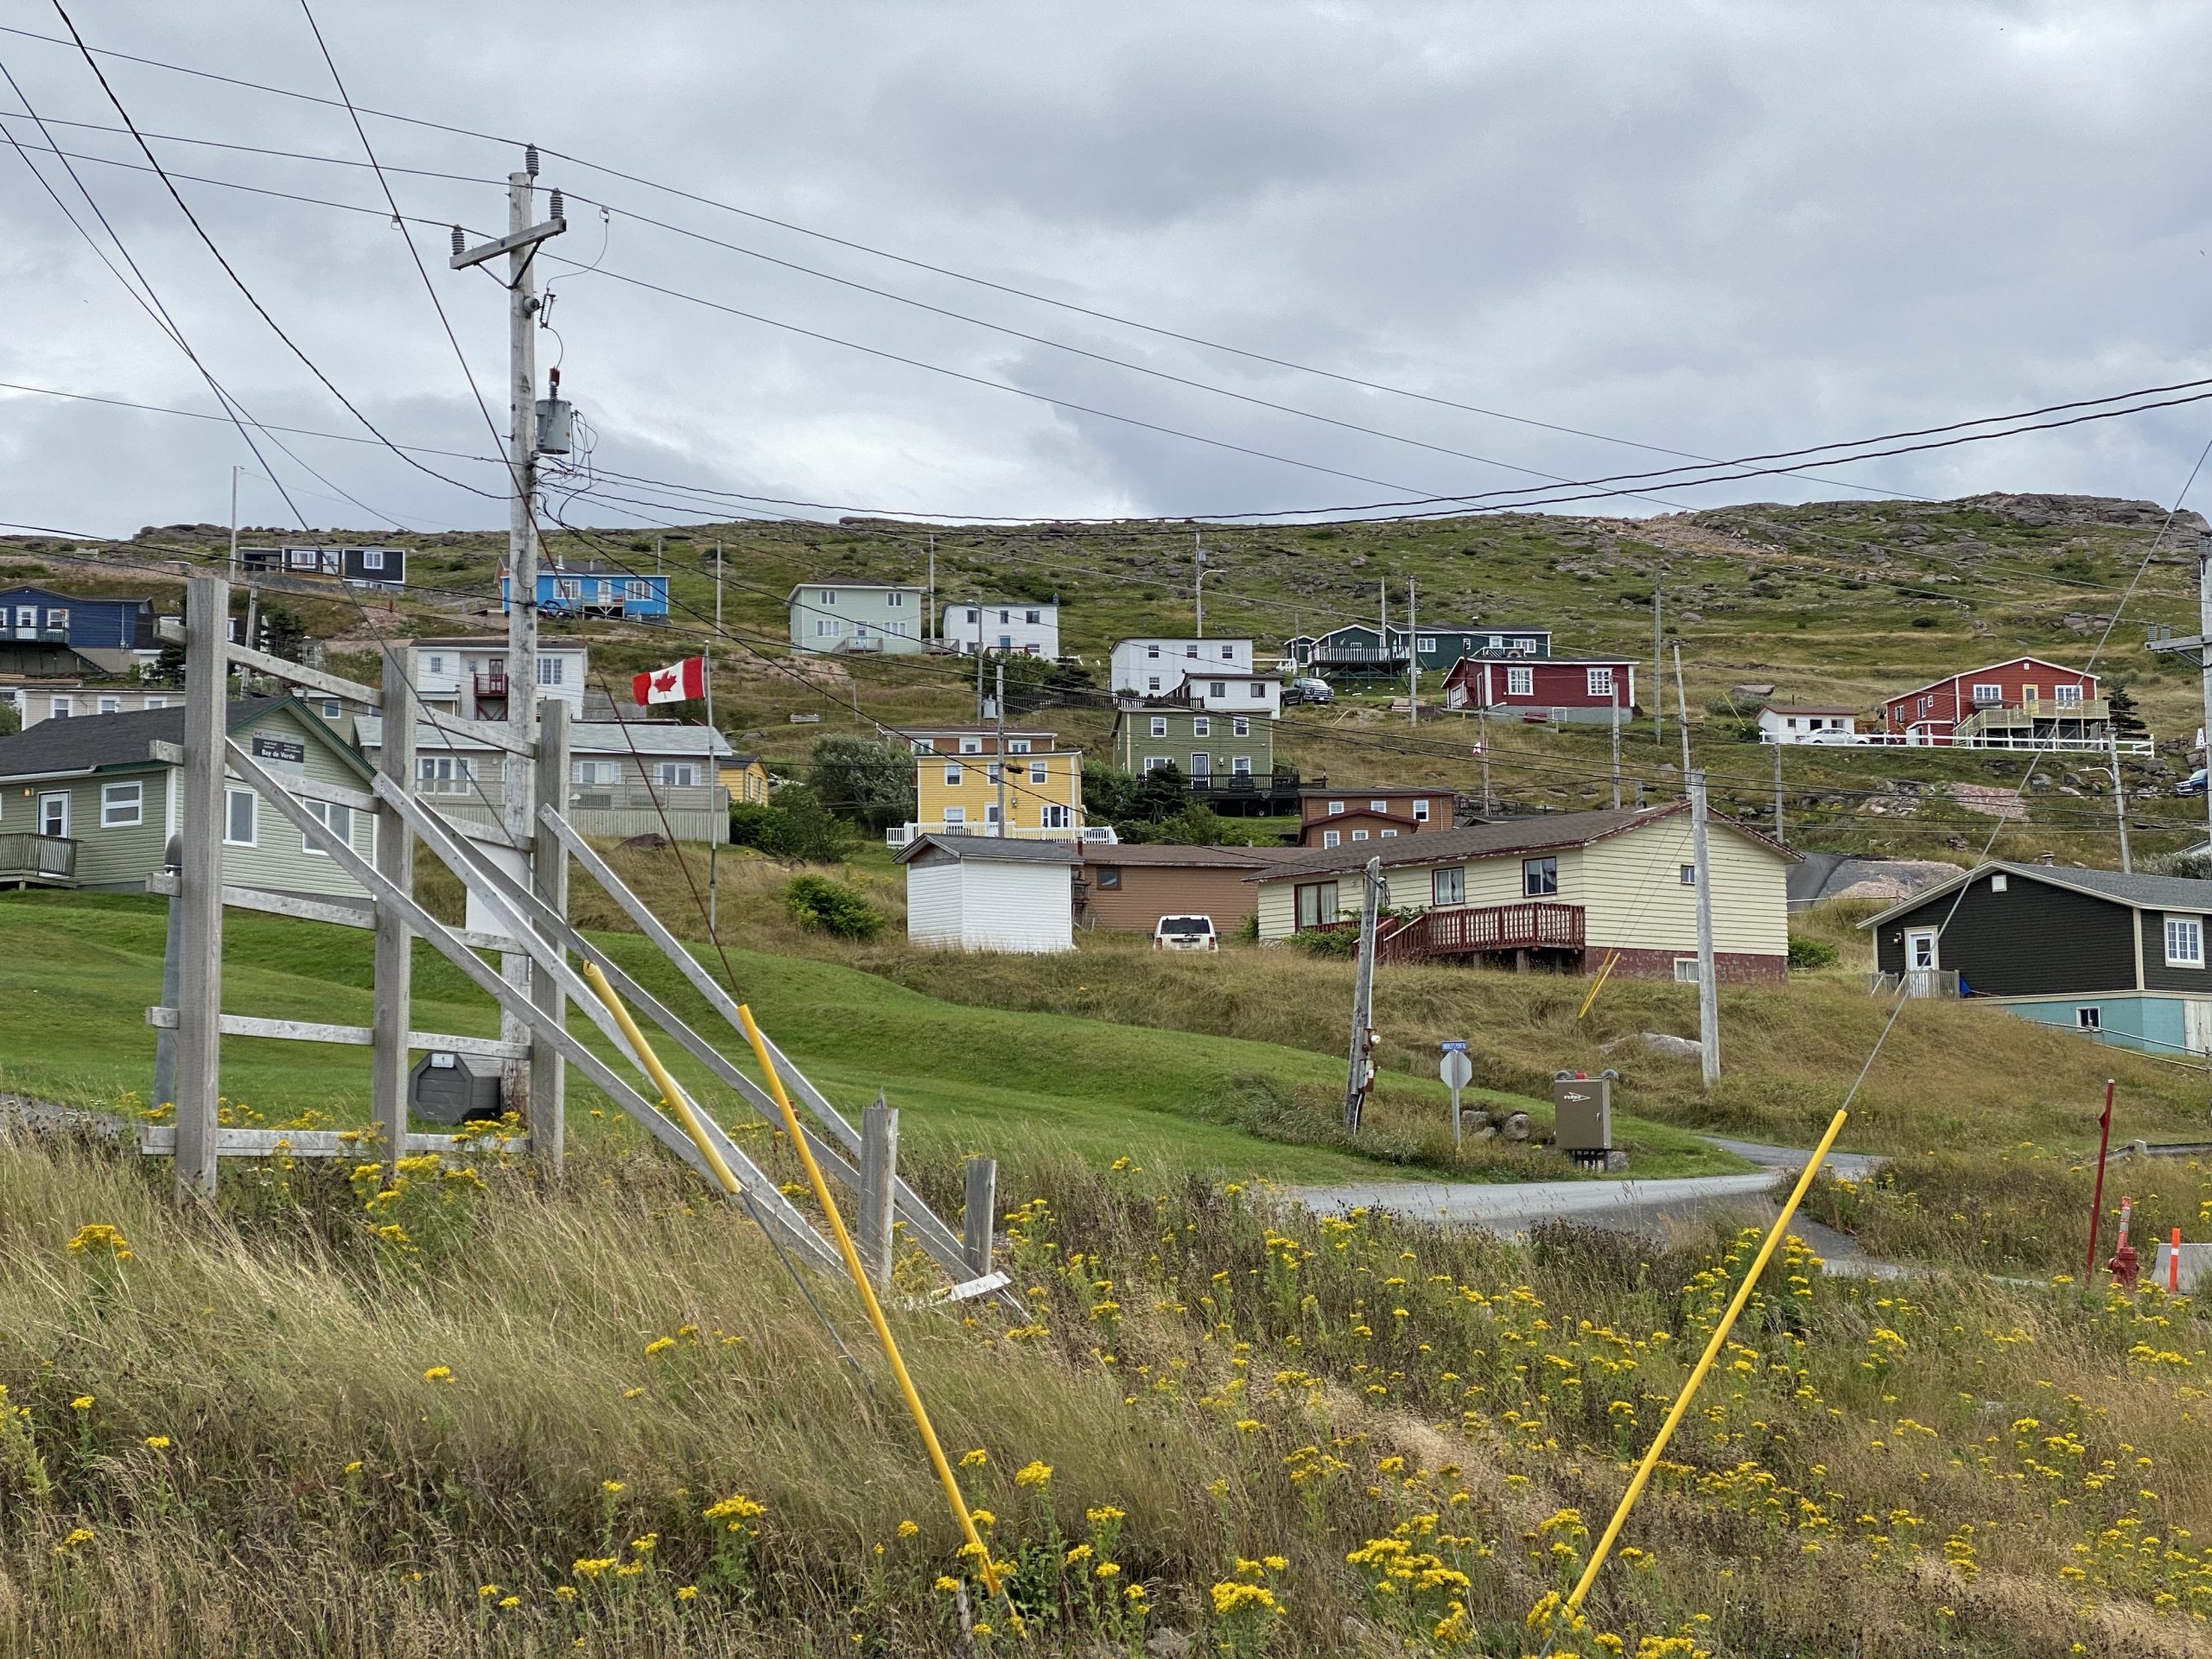 A view of local houses in Bay de Verde, looking east from the harbor, in Newfoundland.